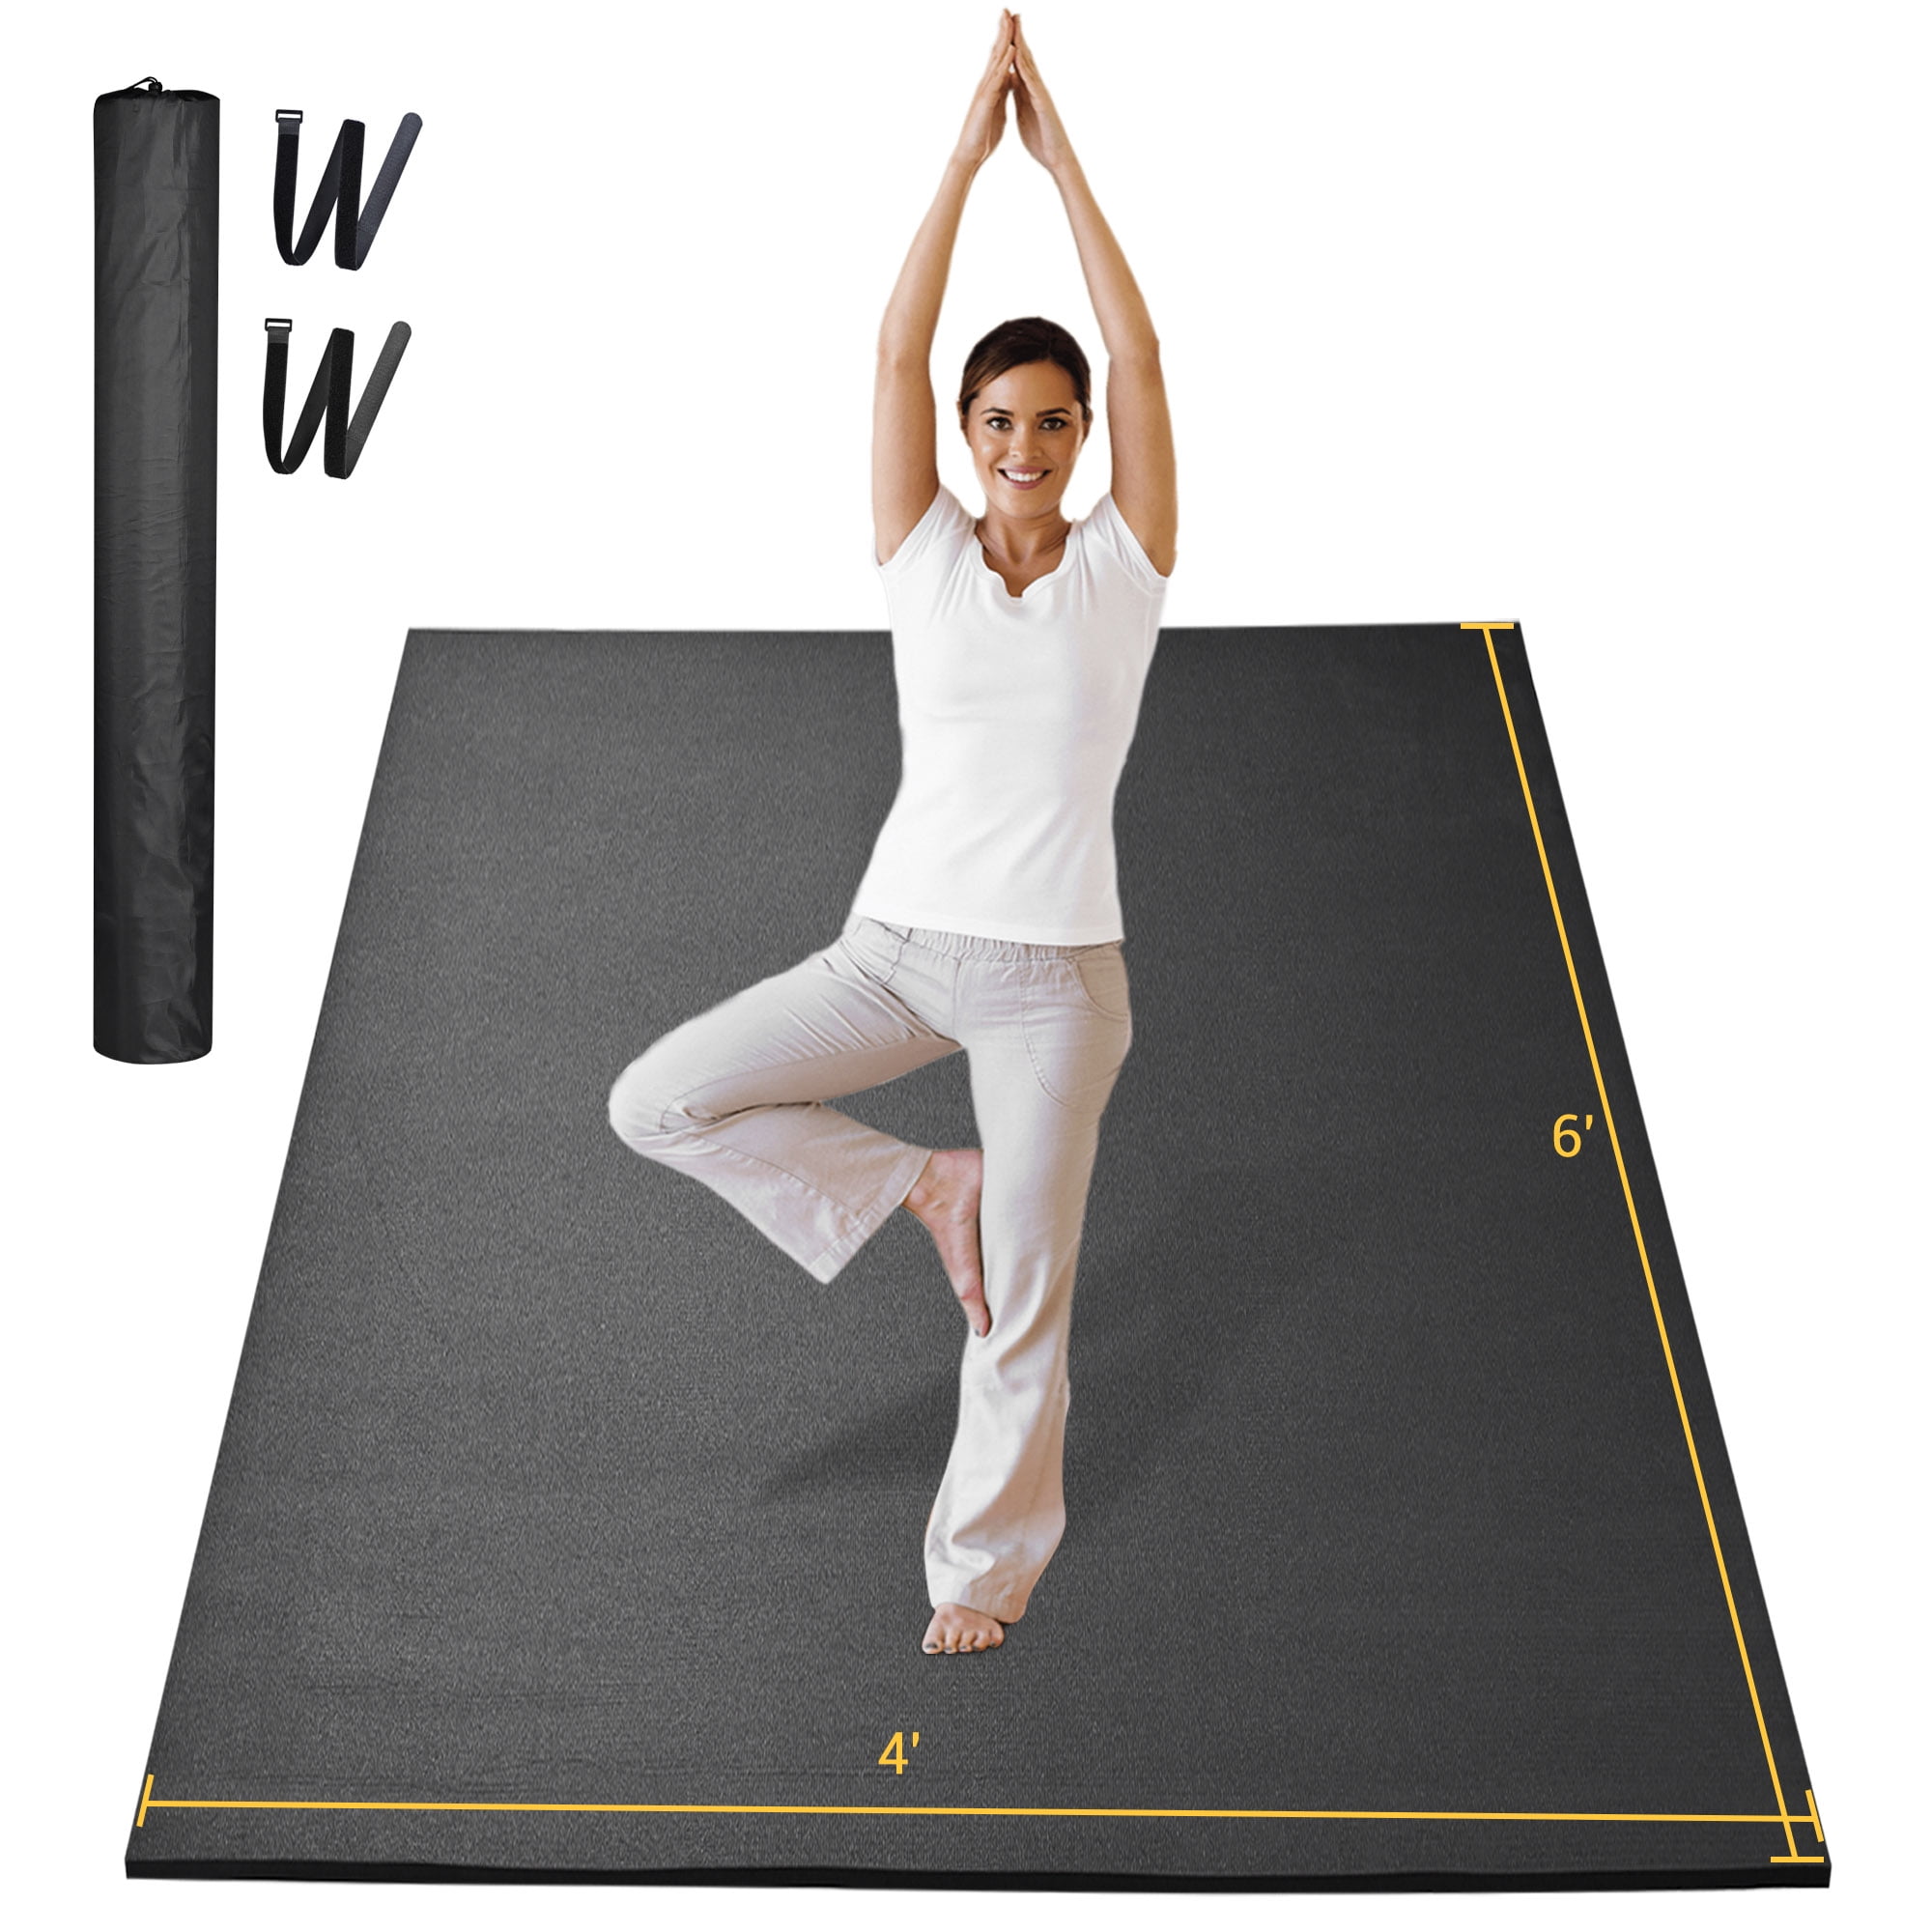 Yescom Large Exercise Mat 6'x4'x6mm Non Slip Workout Mat for Pilates  Stretching Cardio Home Gym Flooring Shoes Friendly 